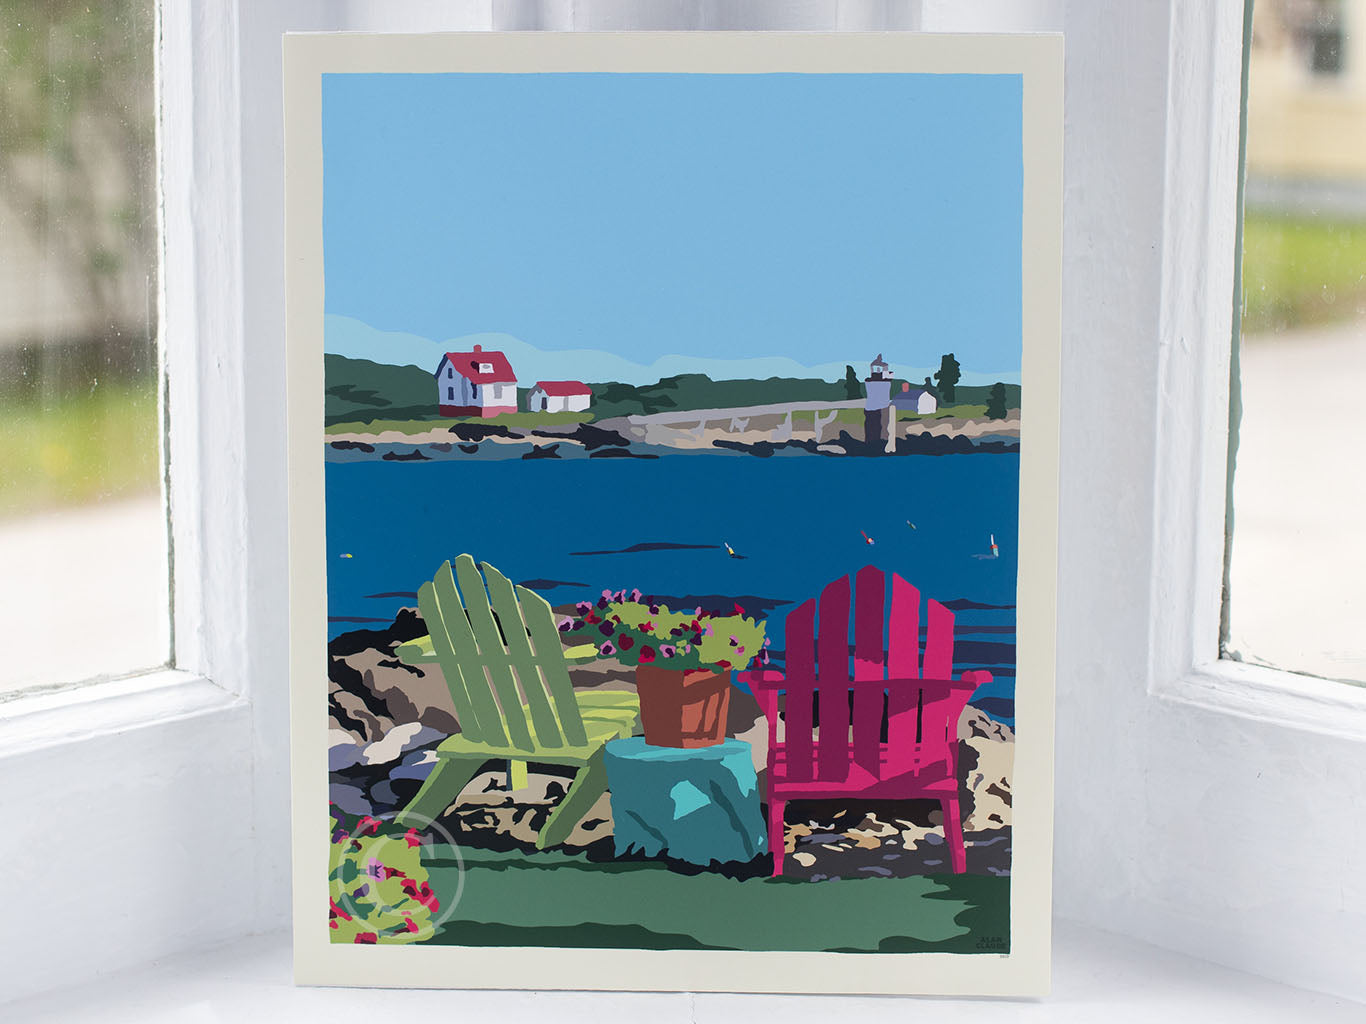 Chairs Overlooking Ram Island Art Print 8" x 10" Wall Poster By Alan Claude - Maine